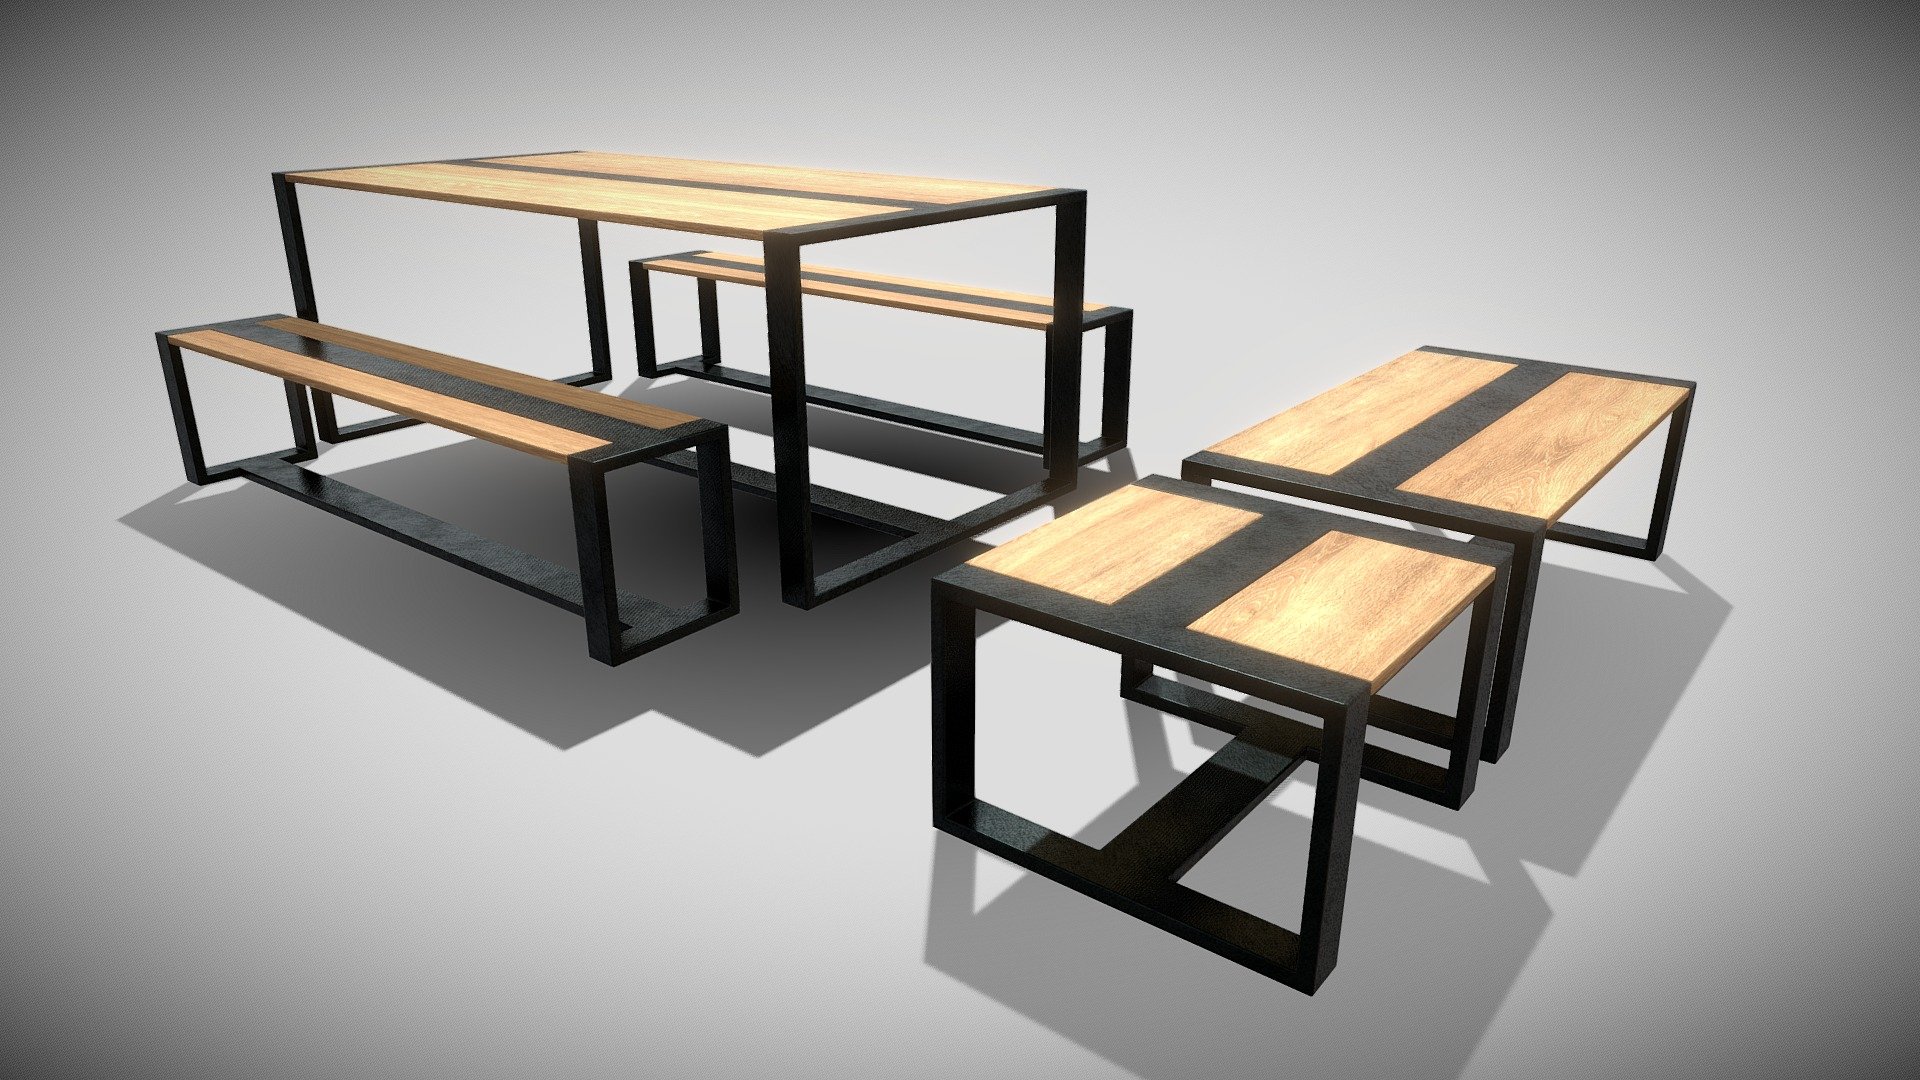 Modern industrial style dining table with double bench, coffeetable and side-table built in Blender 2.82 according to real world measurements 3d model